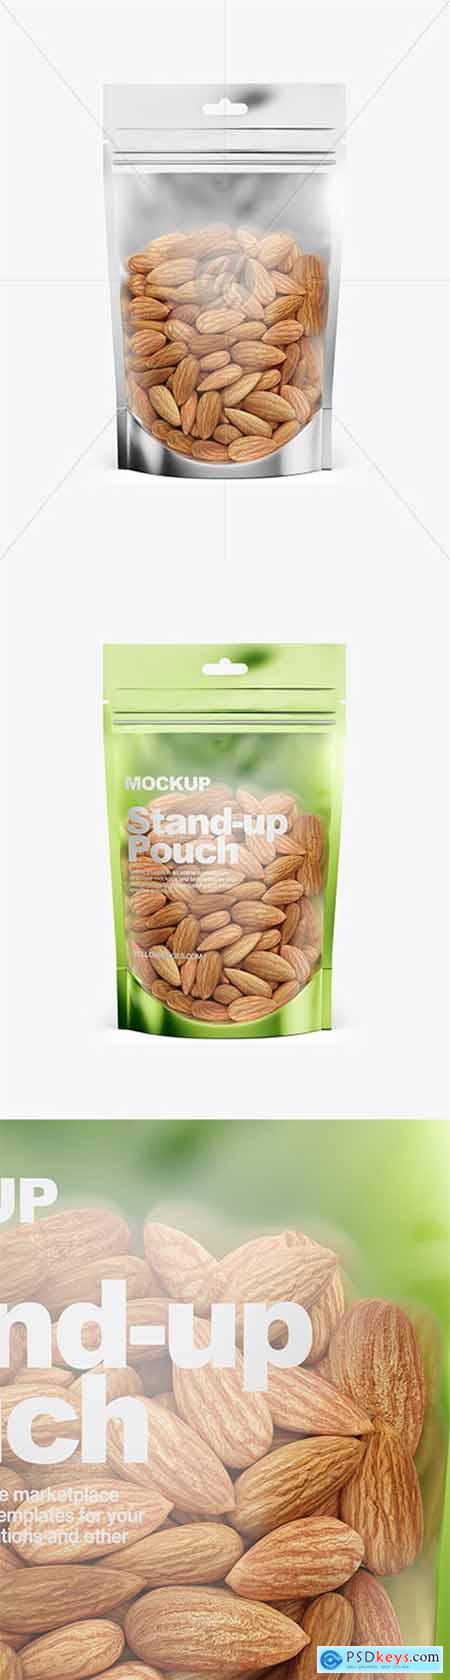 Glossy Transparent Stand-Up Pouch W- Almond Nuts Mockup - Front View 33048